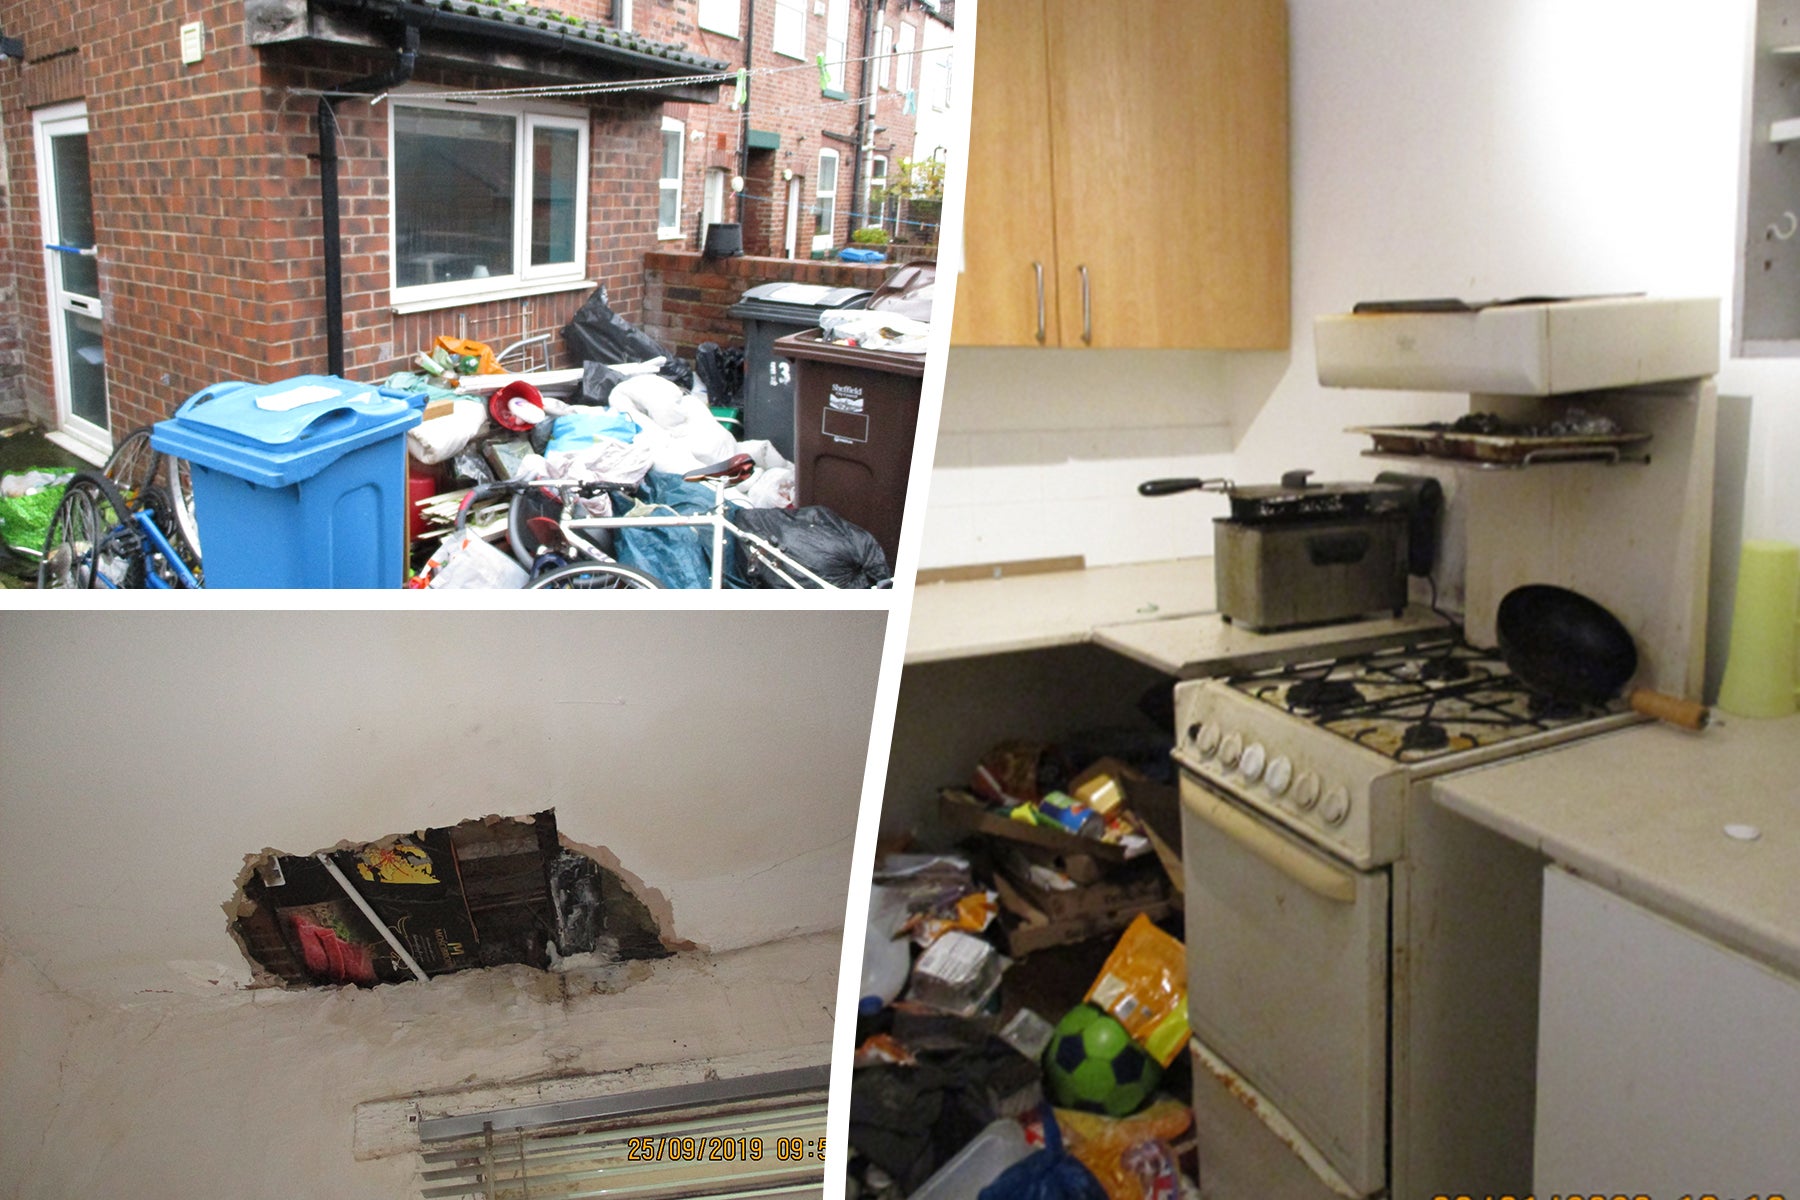 Inside hazardous property rented out by Nilendu Das, 55, who has been given longest ban ever on letting properties in country